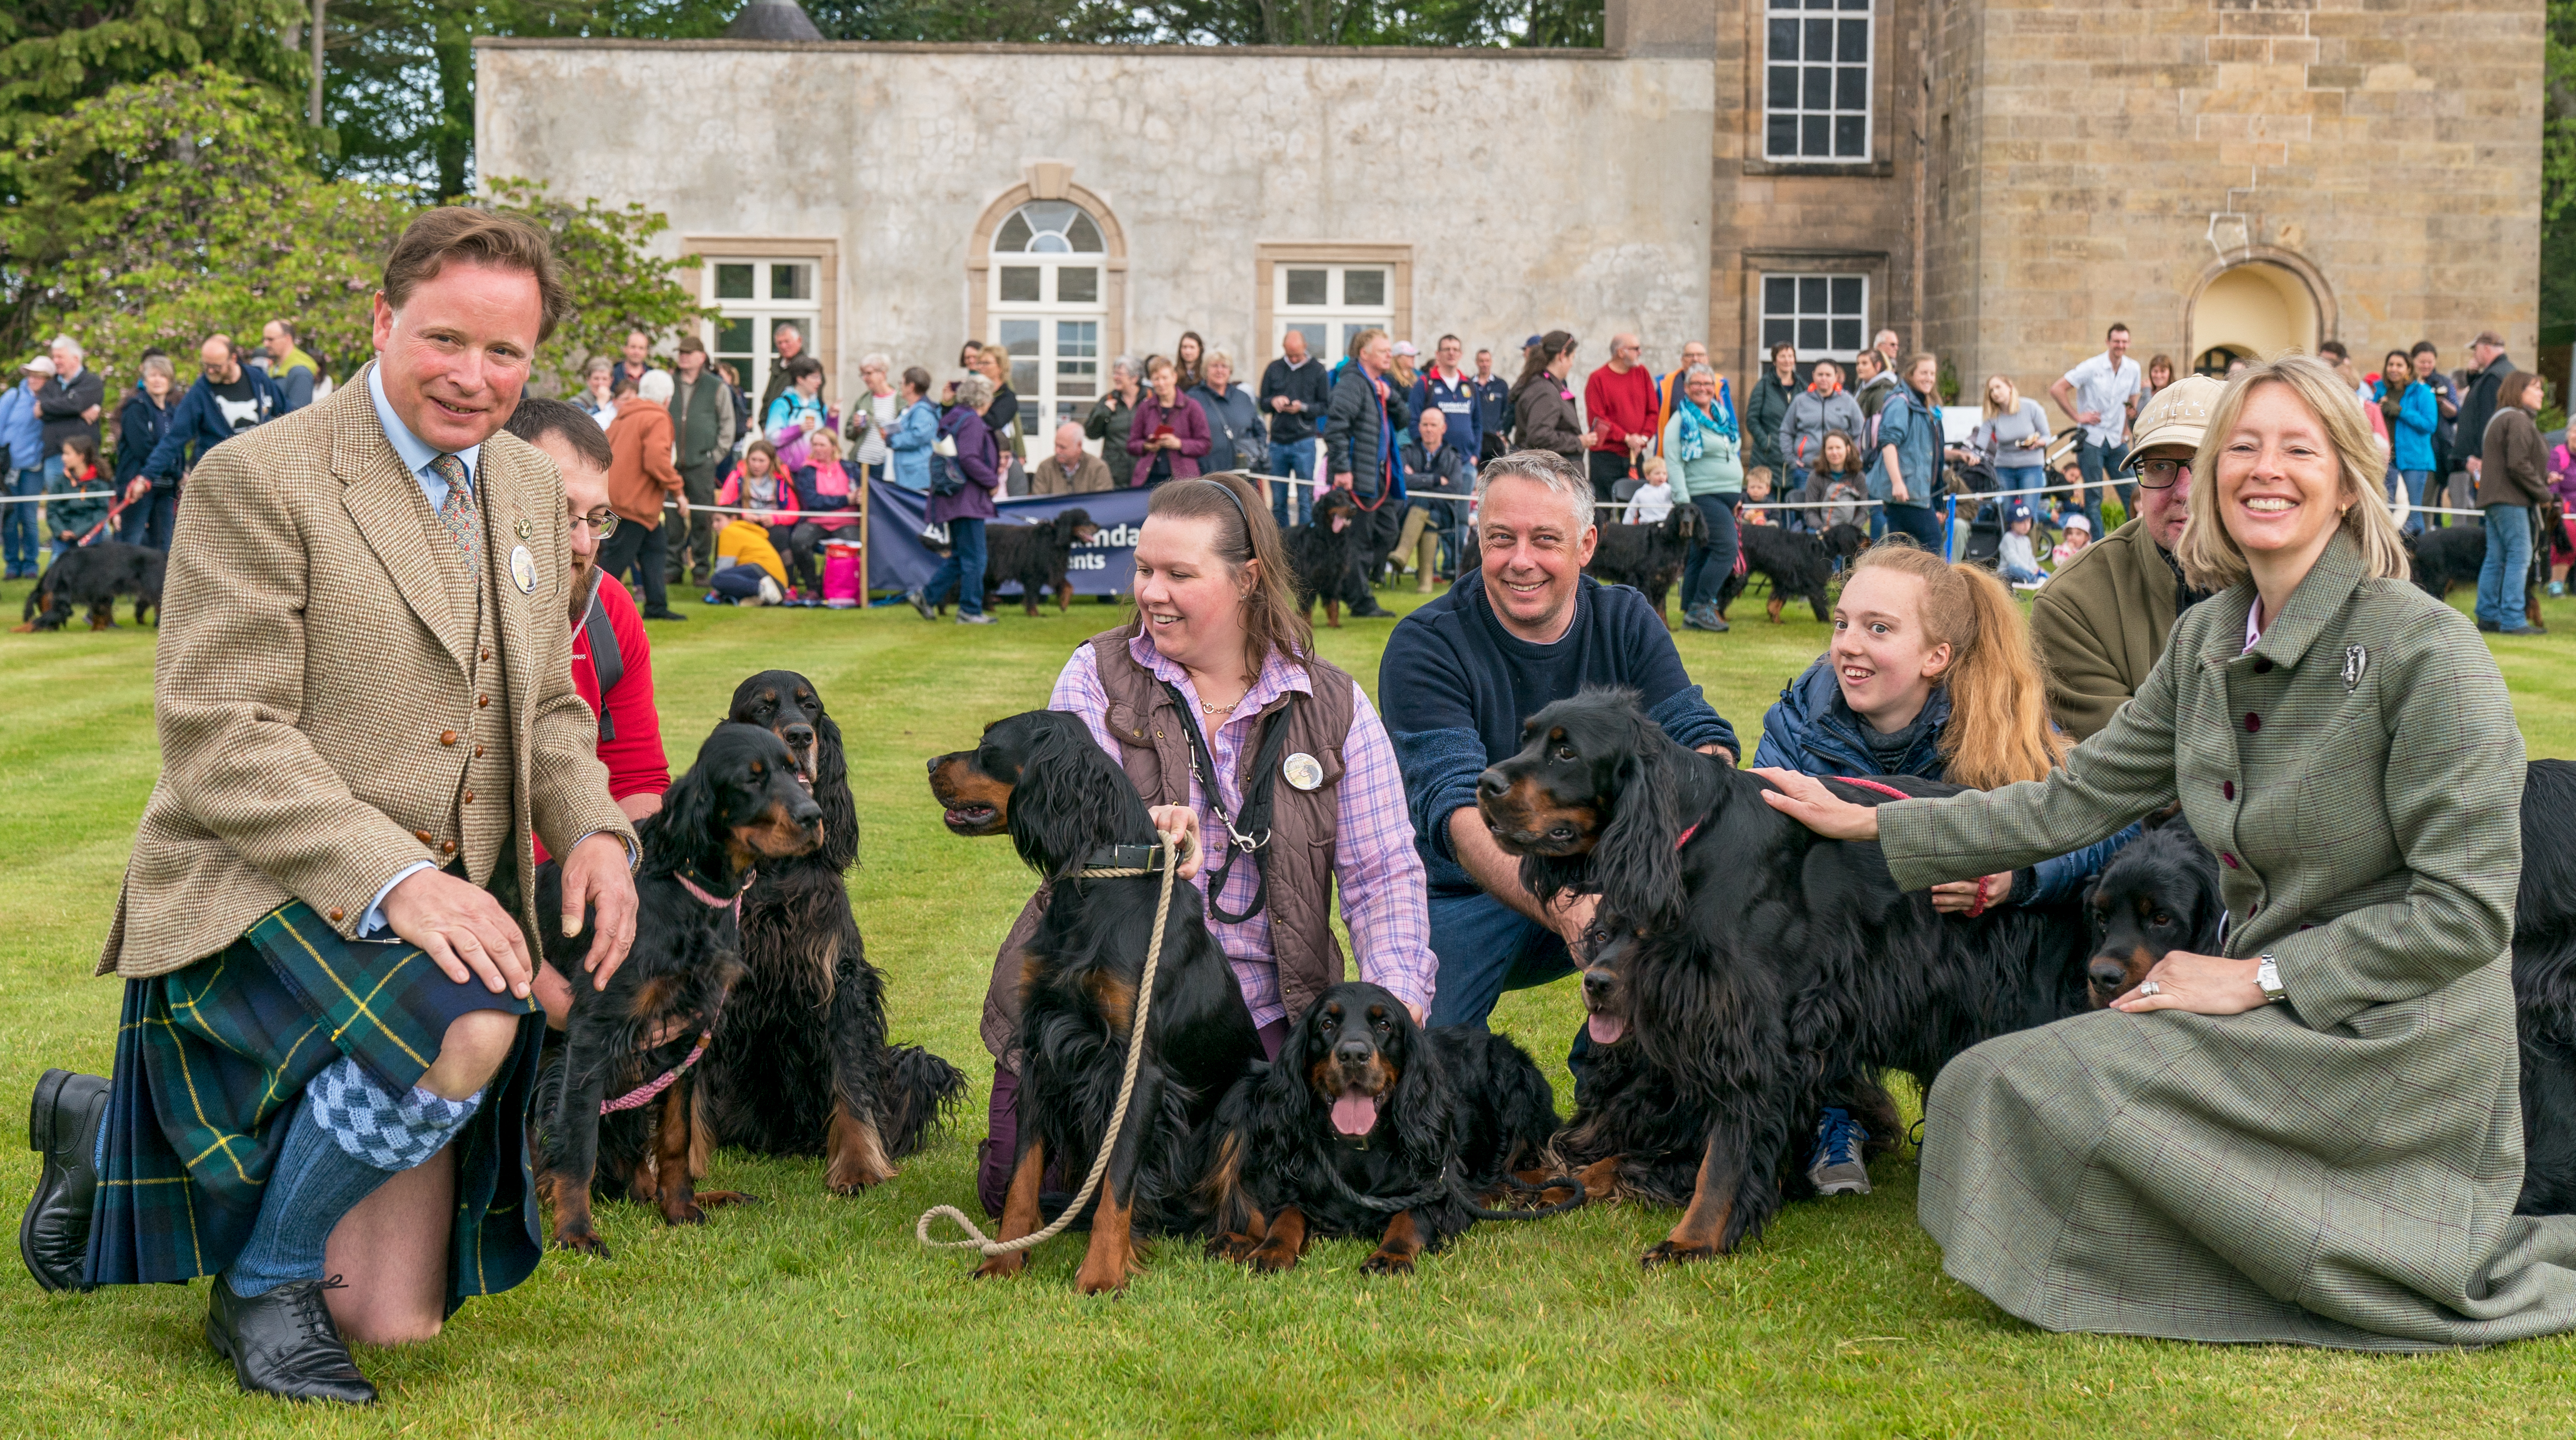 Angus and Zara Gordon Lennox with the assembly of Gordon Setters within their Castle Grounds.